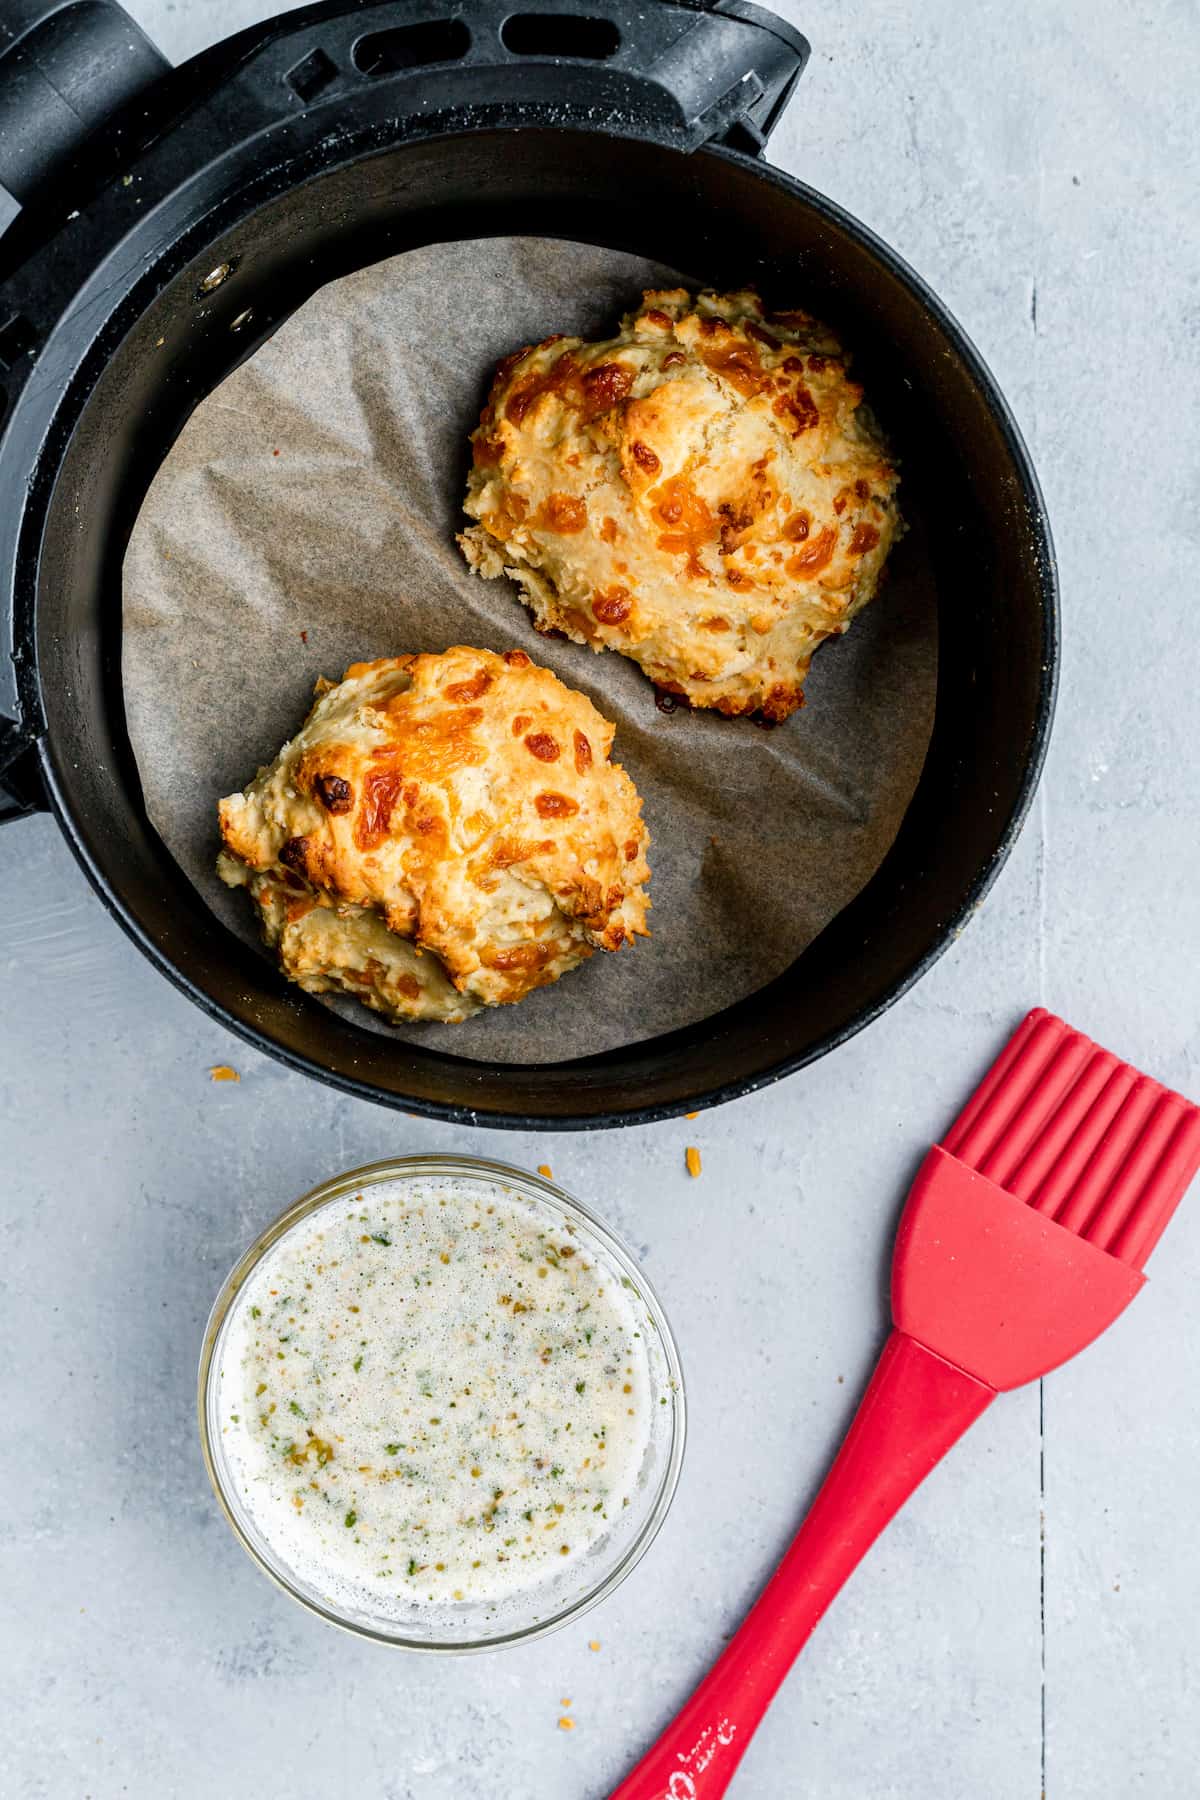 Two Red Lobster Biscuits in an Air Fryer Beside a Dish of Garlic Butter